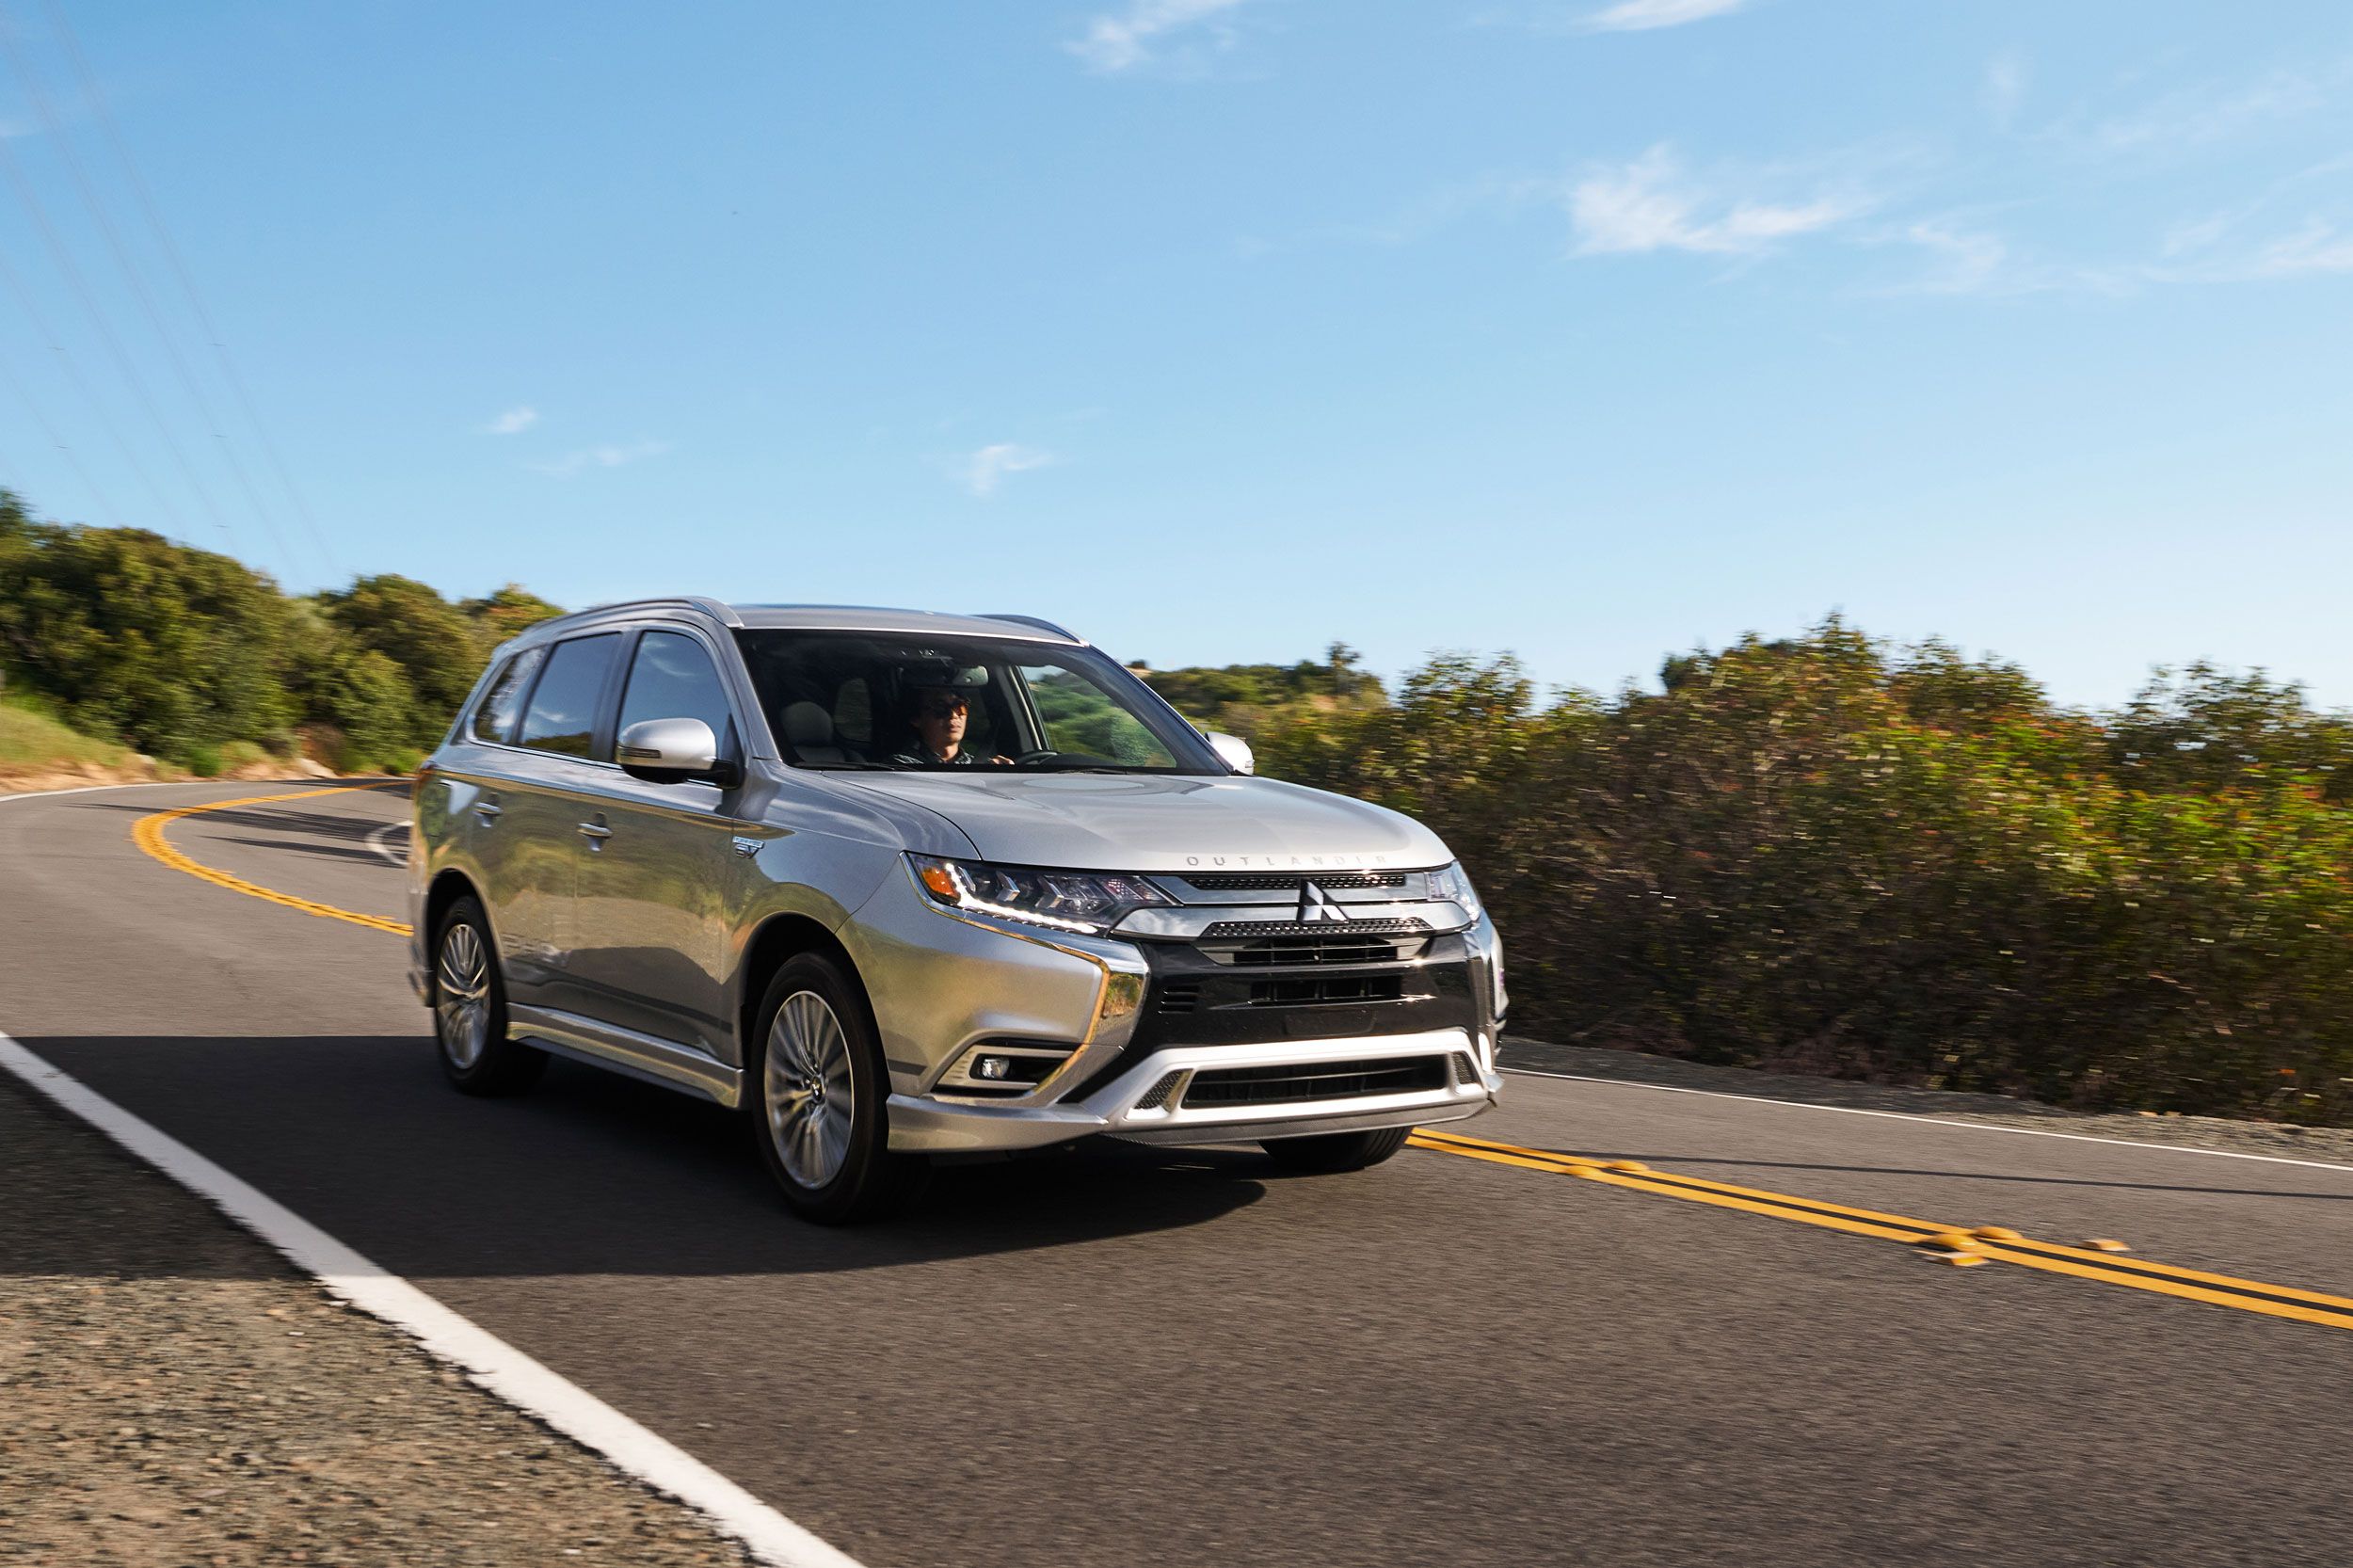 2021 Mitsubishi Outlander Review, Pricing, and Specs